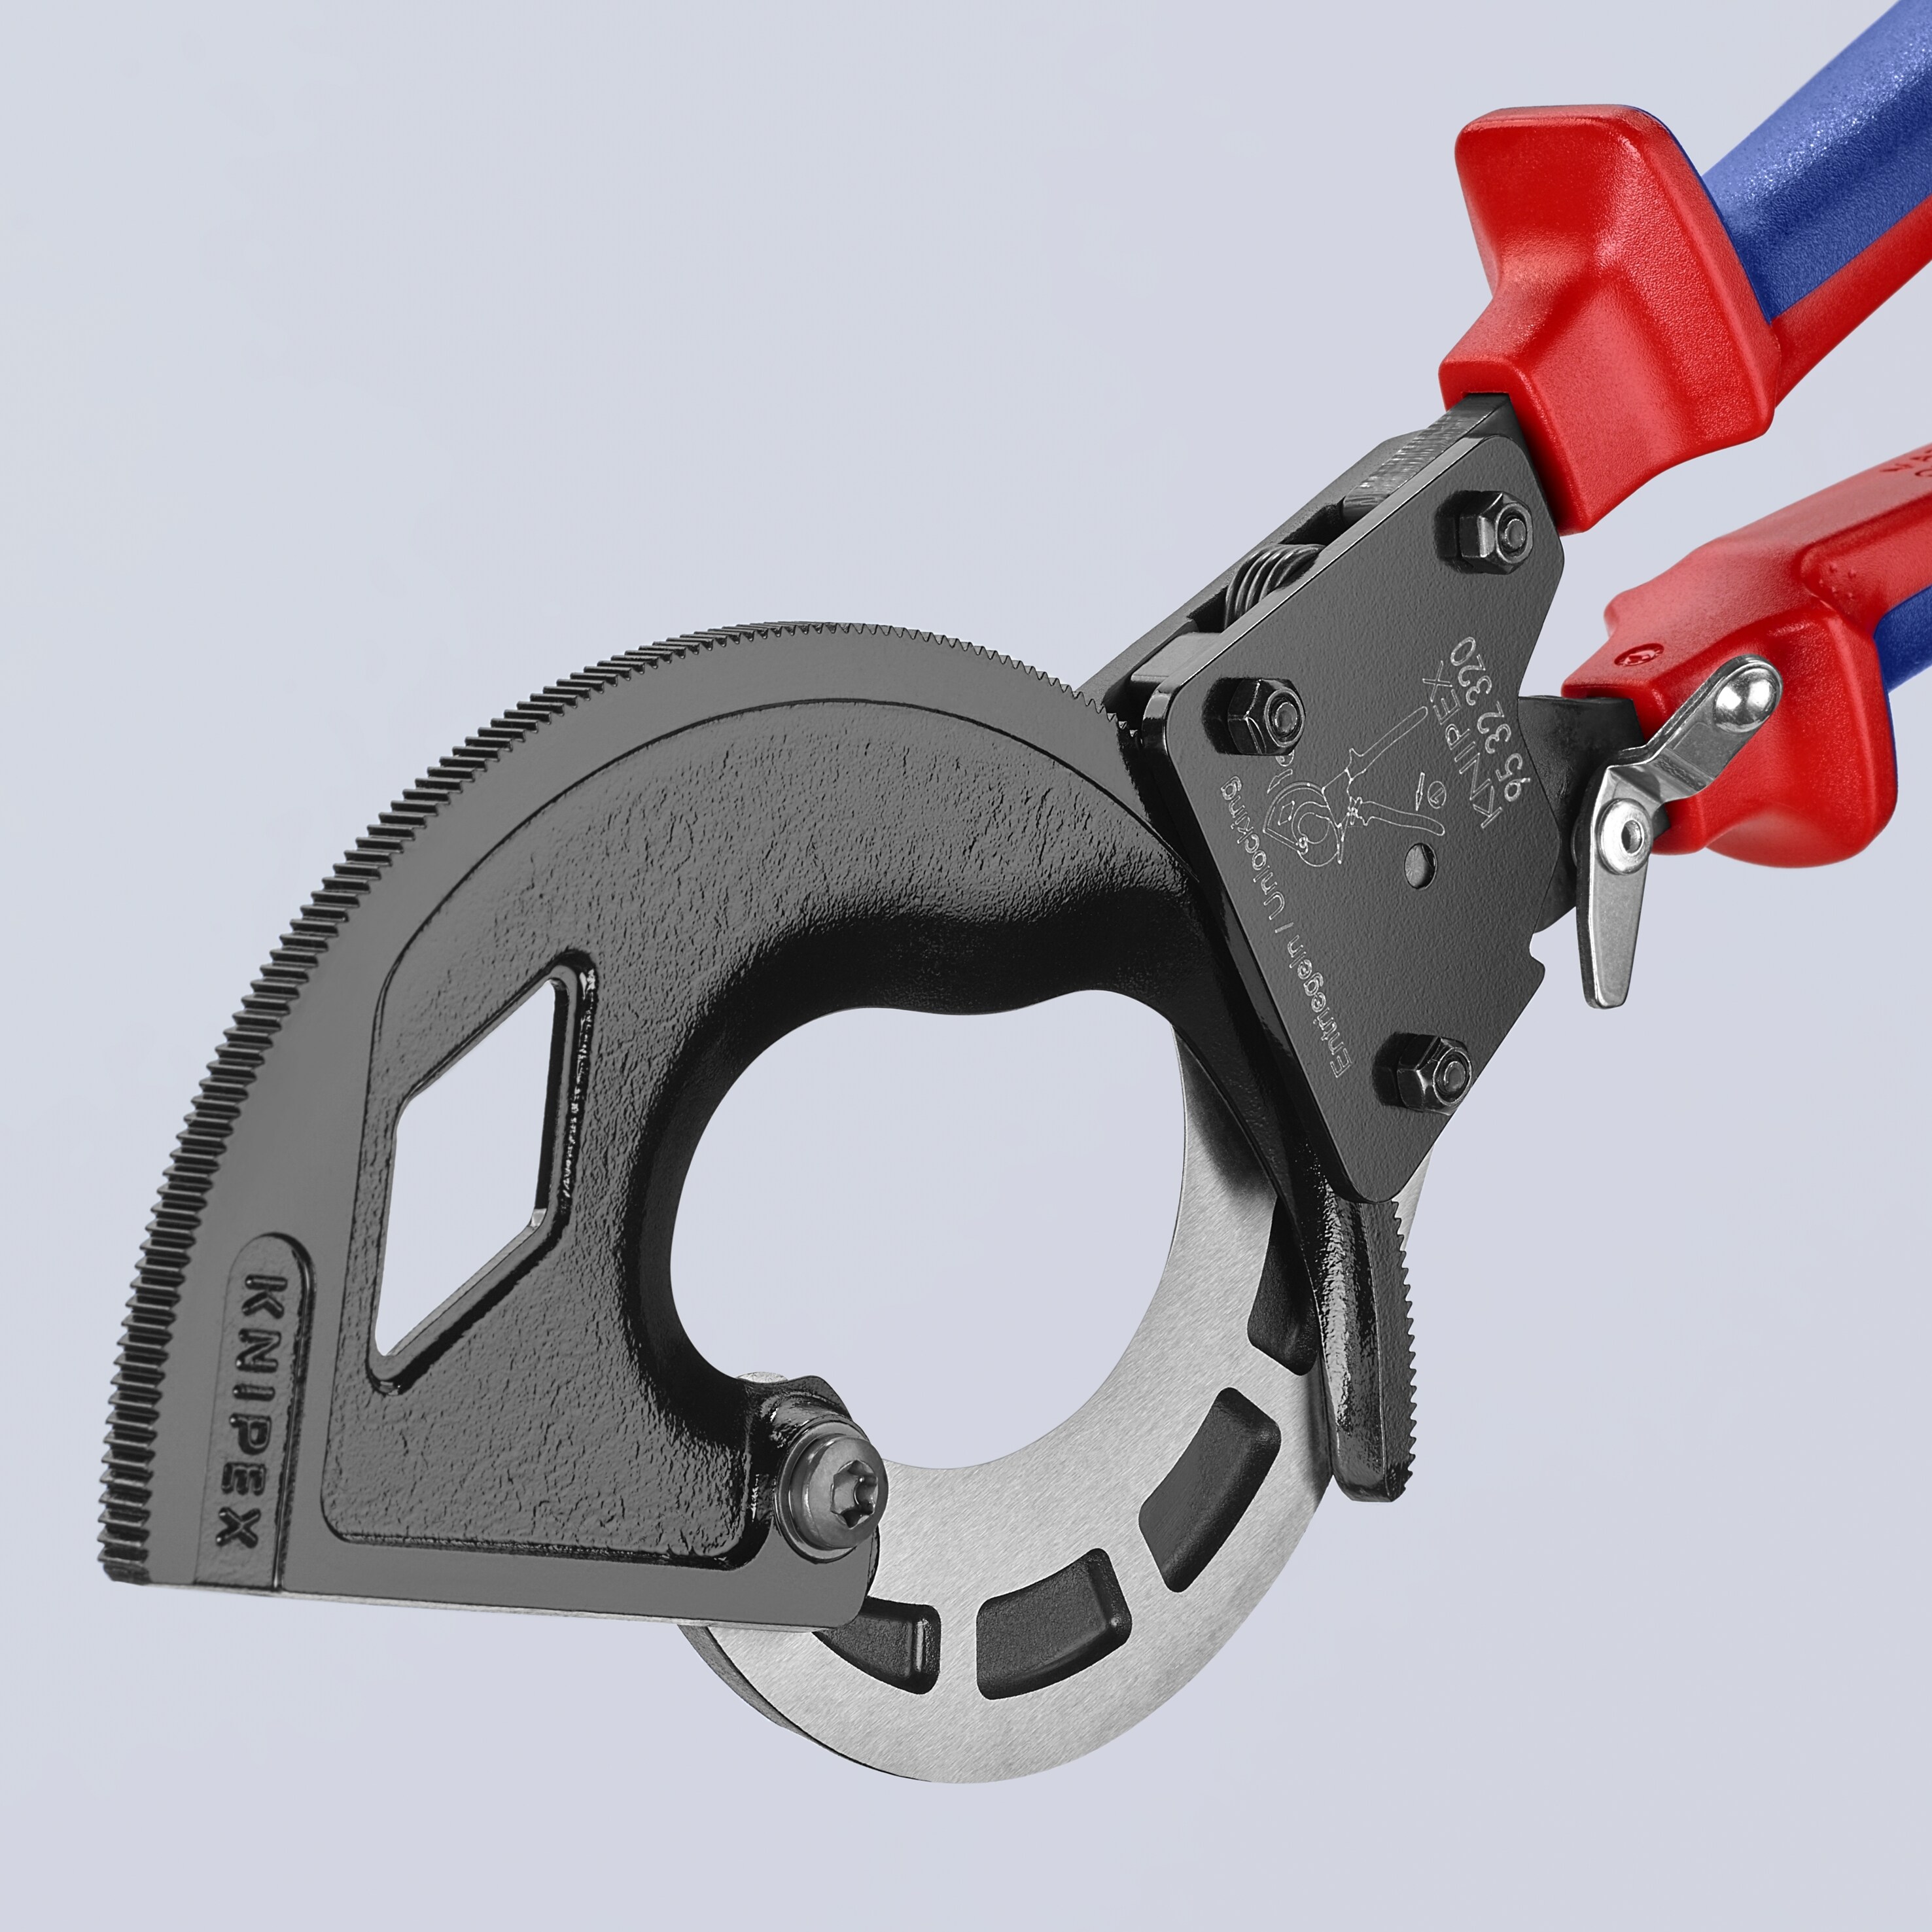 KNIPEX Cutting Pliers at Lowes.com